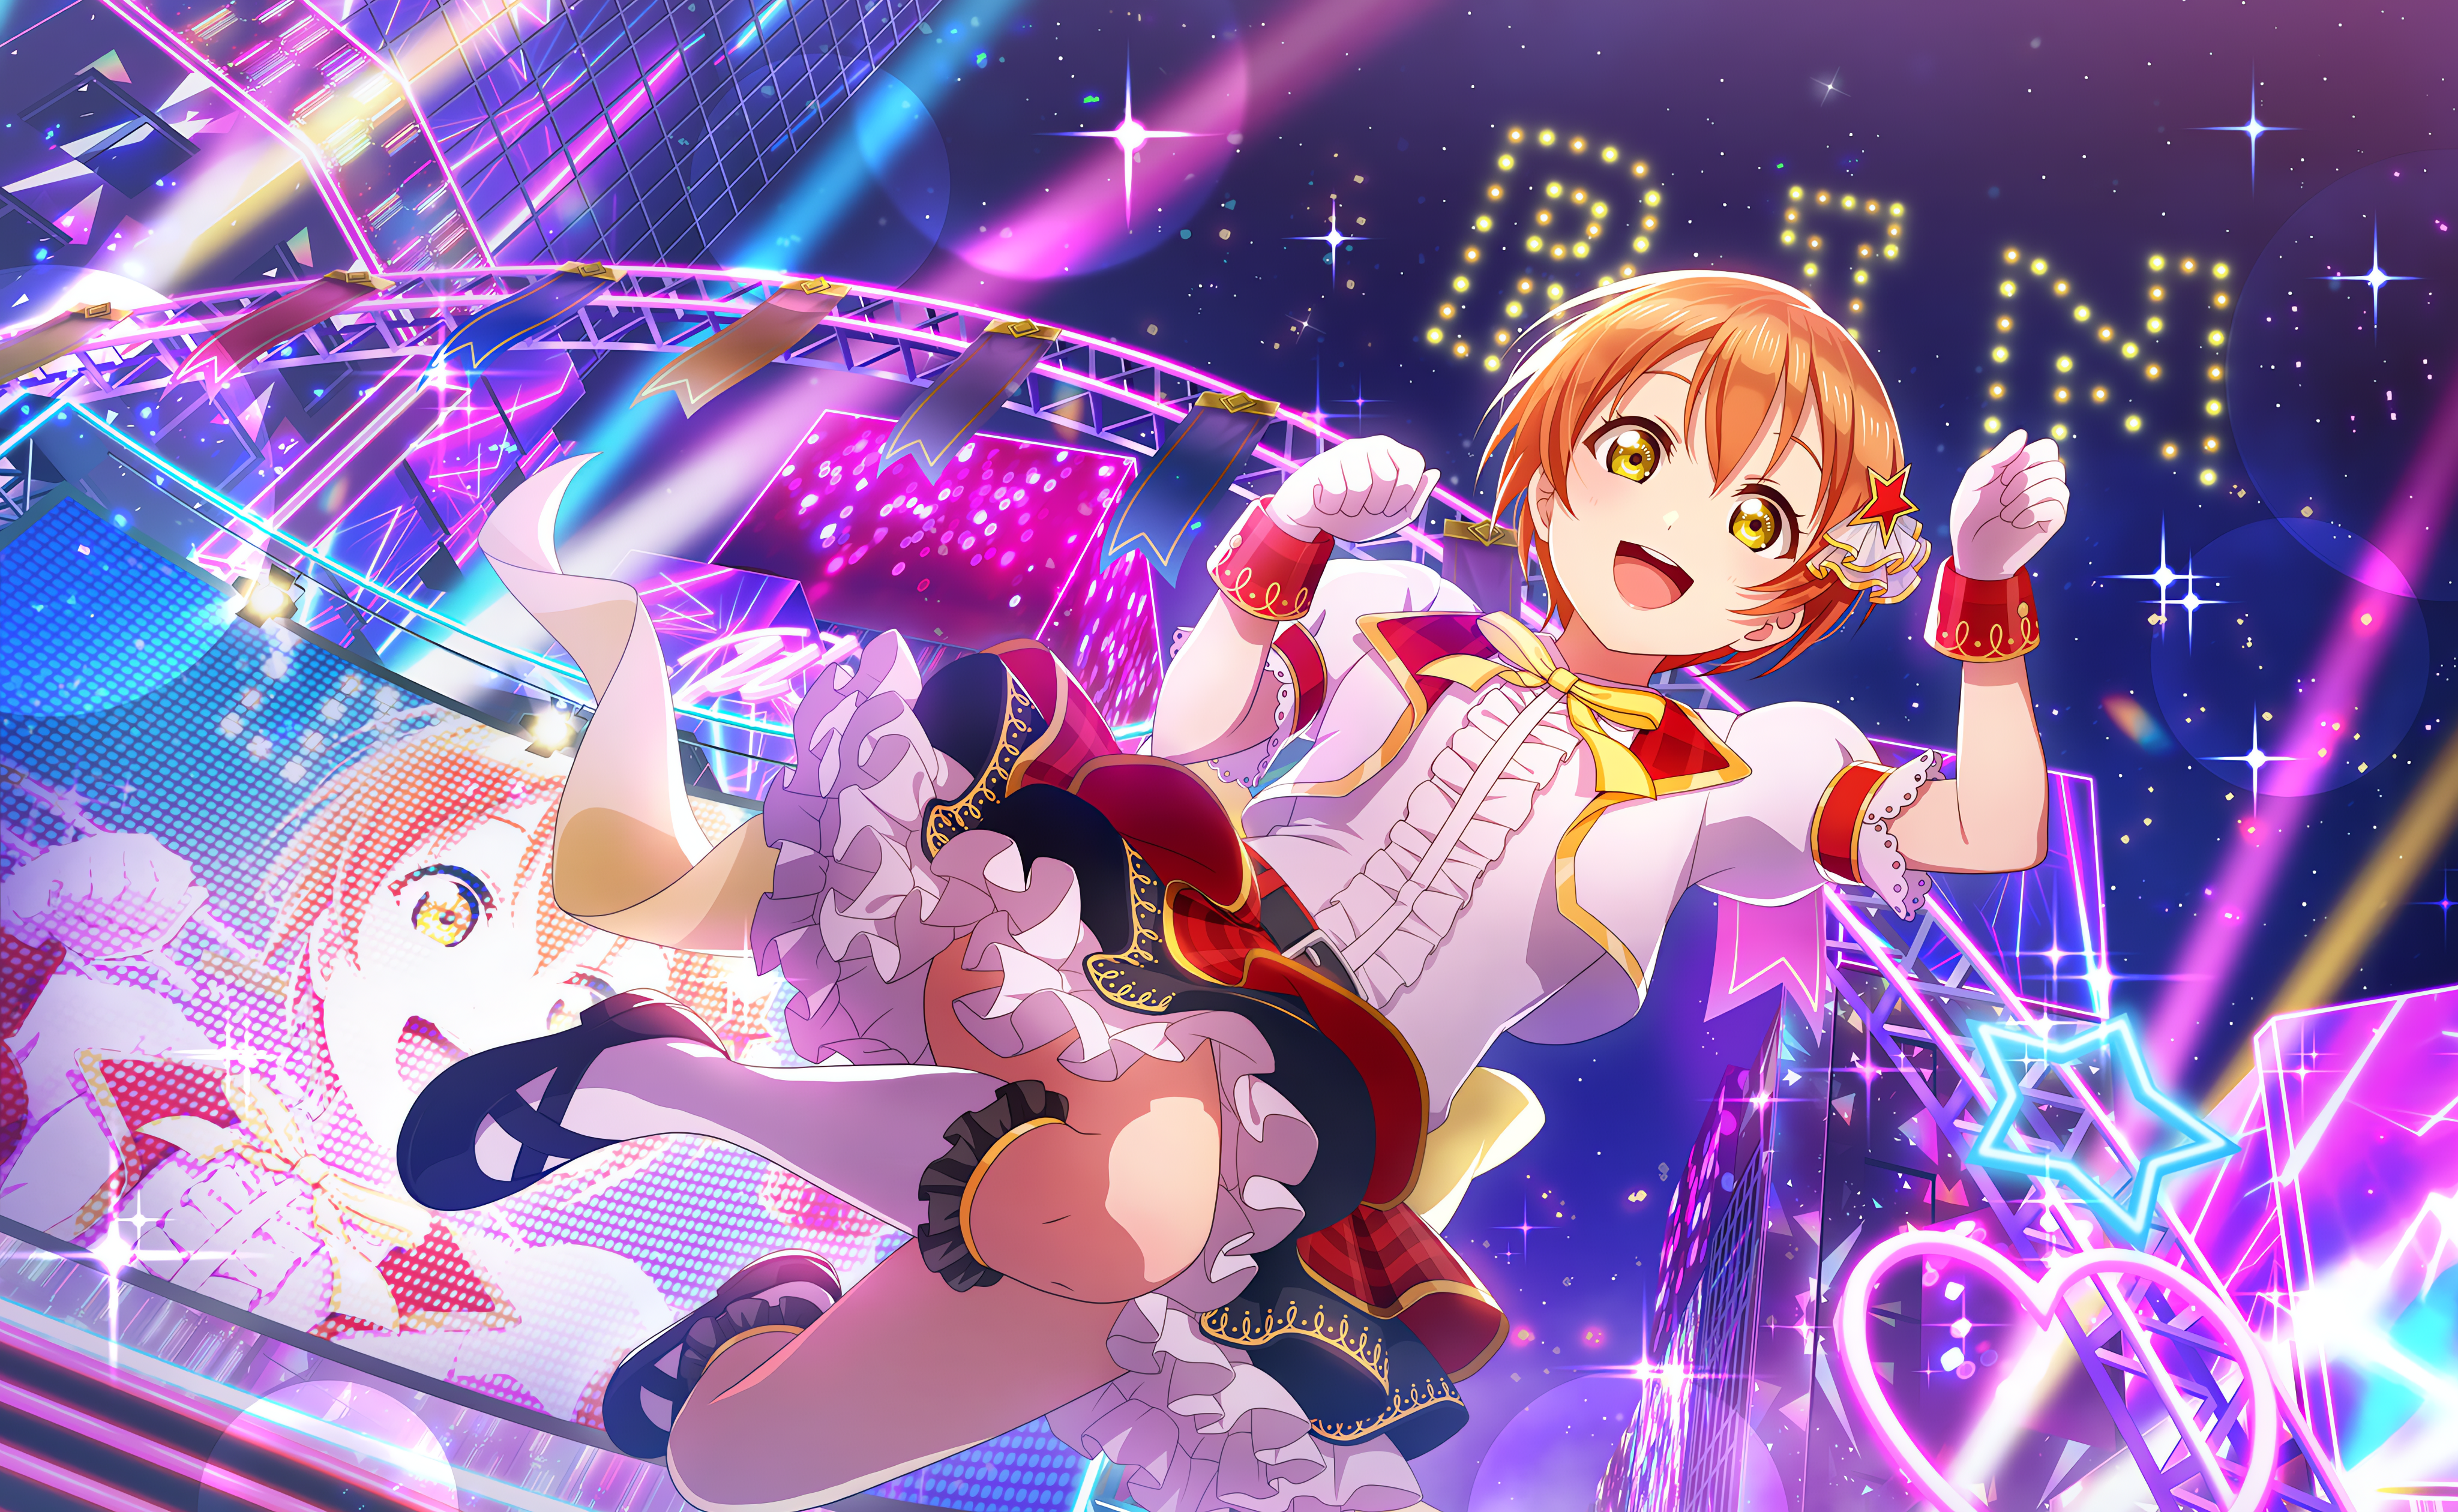 Hoshizora Rin Love Live Anime Anime Girls Bow Tie Open Mouth Gloves Uniform Looking At Viewer Stars  4096x2520